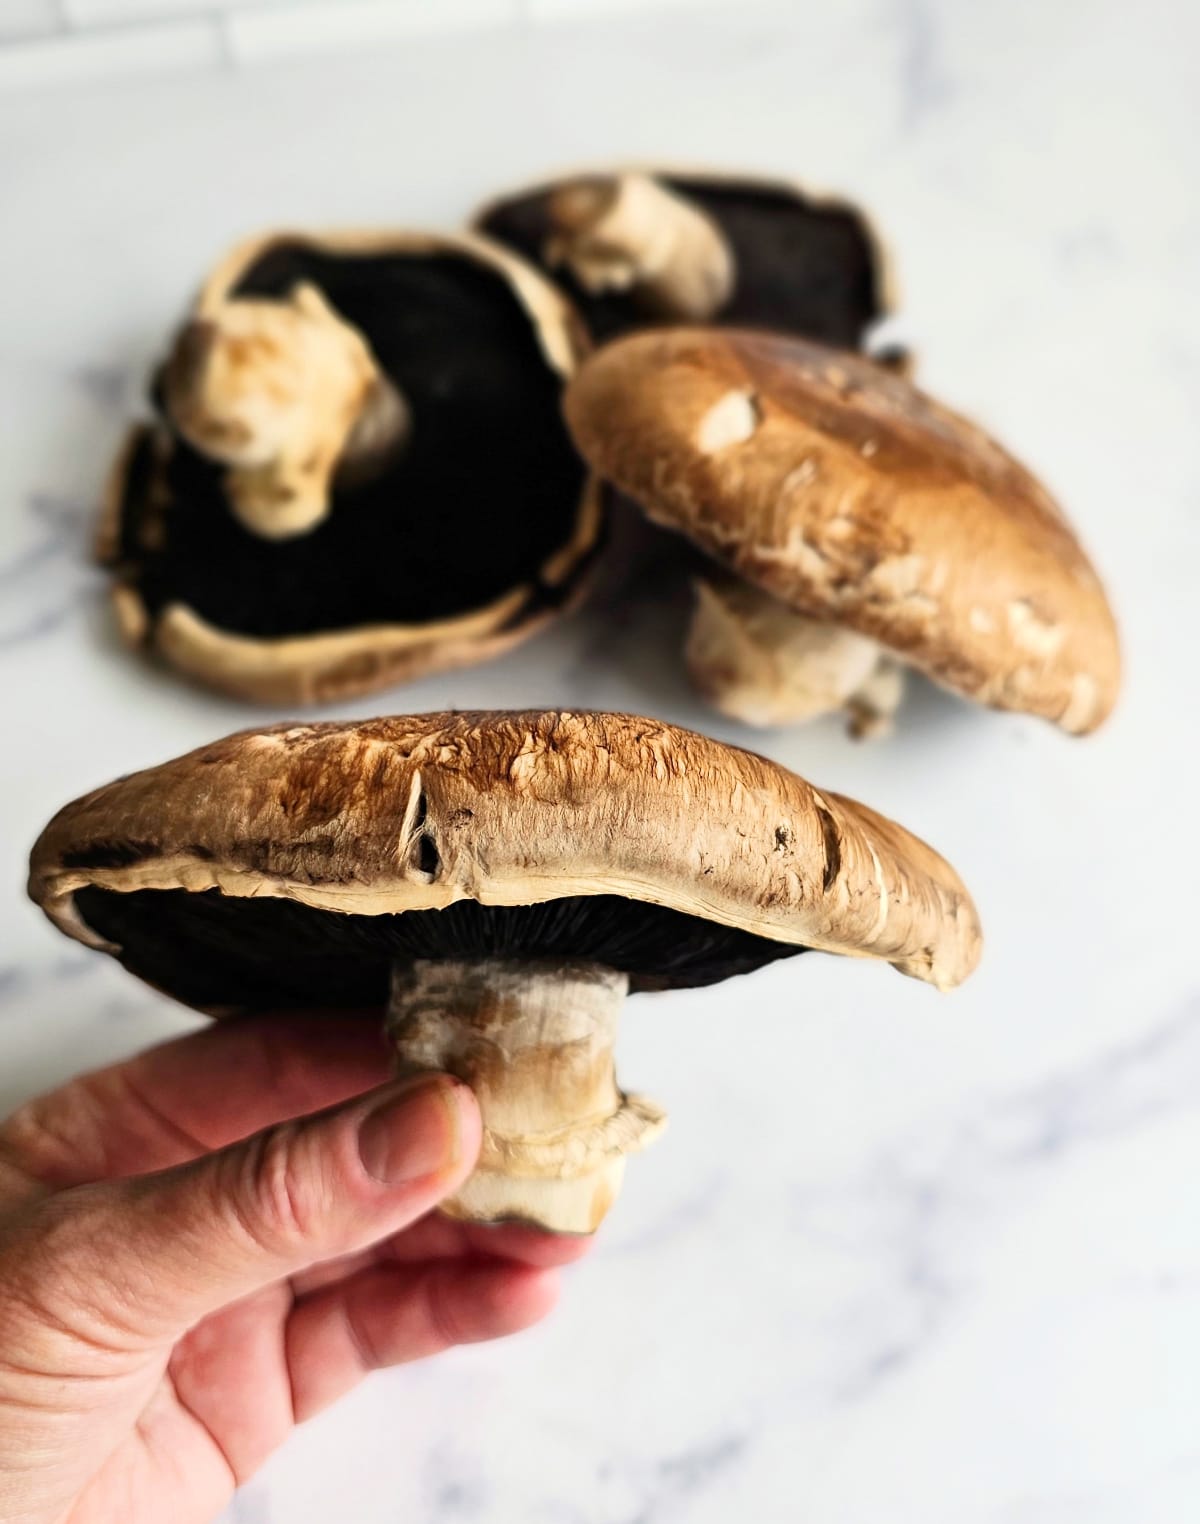 A hand holds 1 Portabella mushroom with 3 additional mushrooms in the background, on a white marble counter